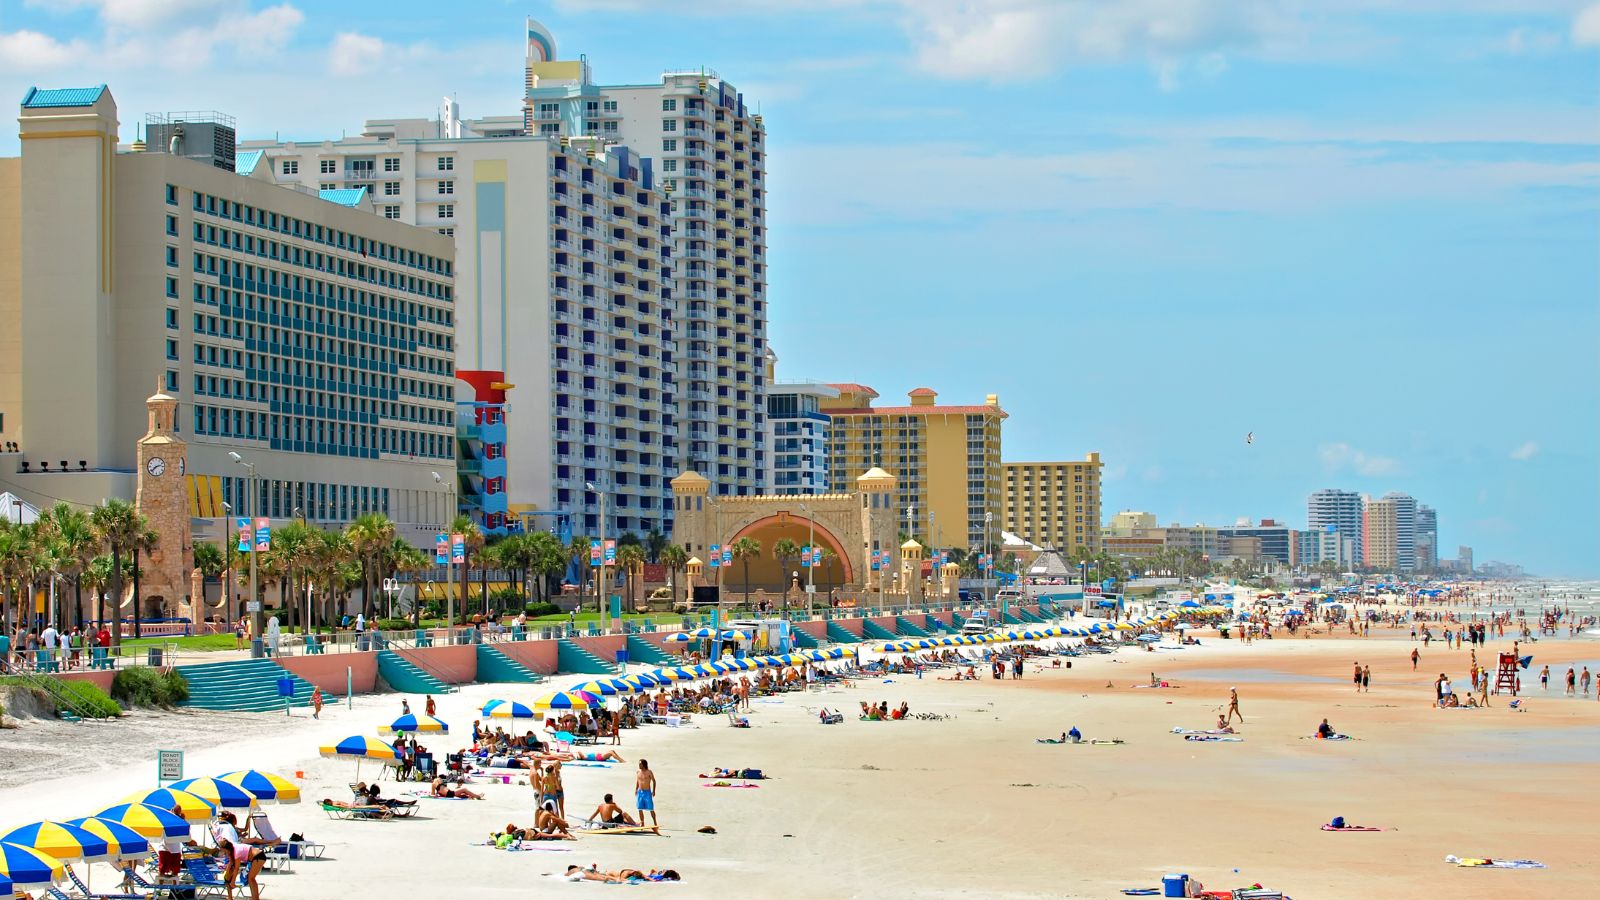 <p><a href="https://alwaysontheshore.com/is-daytona-beach-safe/">Always on the Shore</a> writes, “The city has worked hard to create a welcoming and safe environment for visitors, with plenty of lighting and security measures in place.” Florida has put measures in place to ensure Daytona Beach is safe, as it’s also a popular spot to vacation.</p>